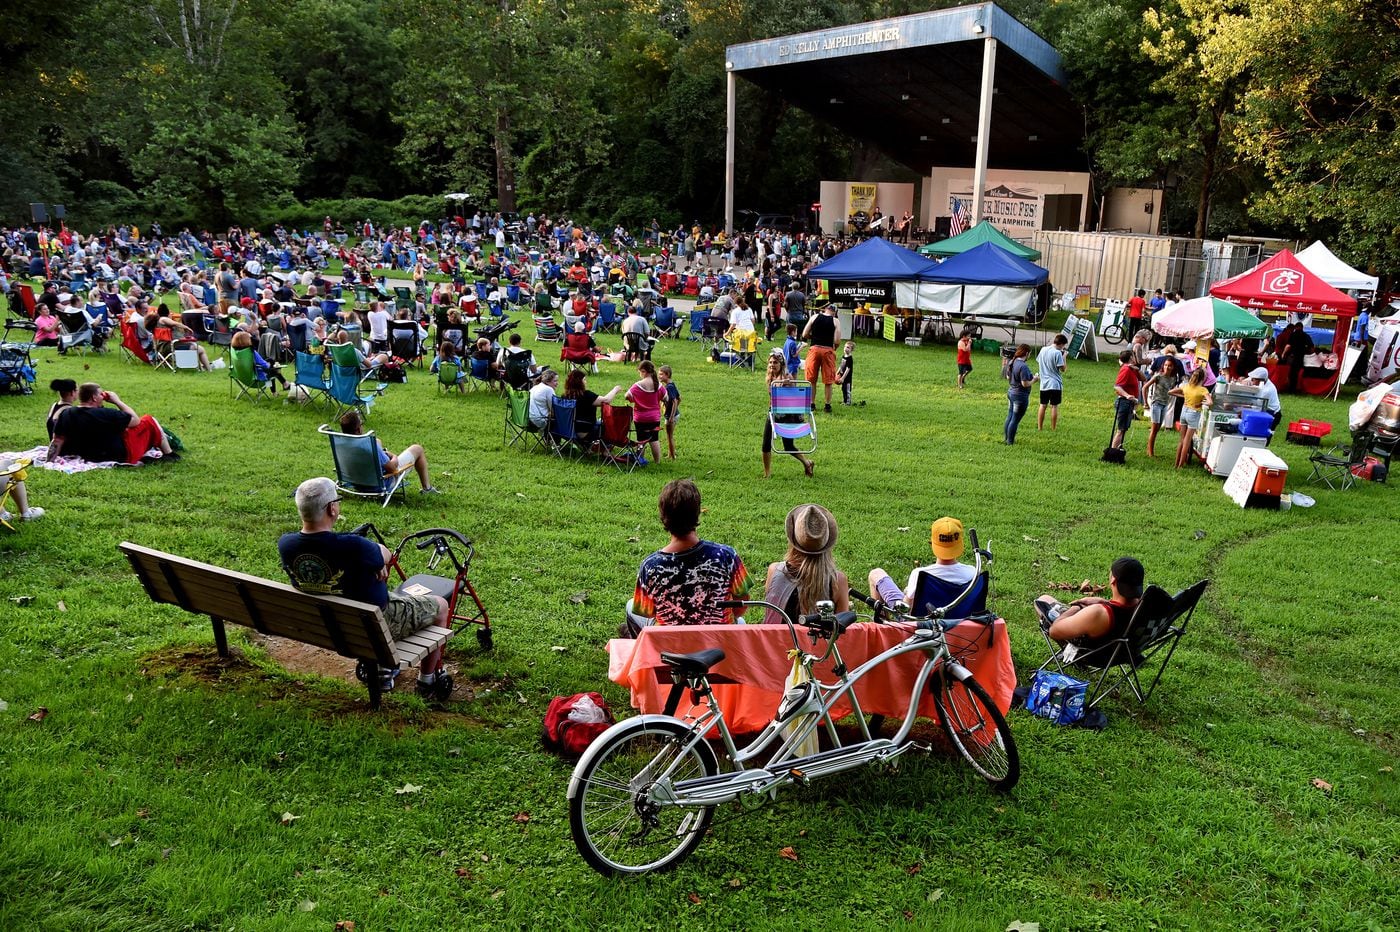 Everything changes — except for the Pennypack Park Music Festival